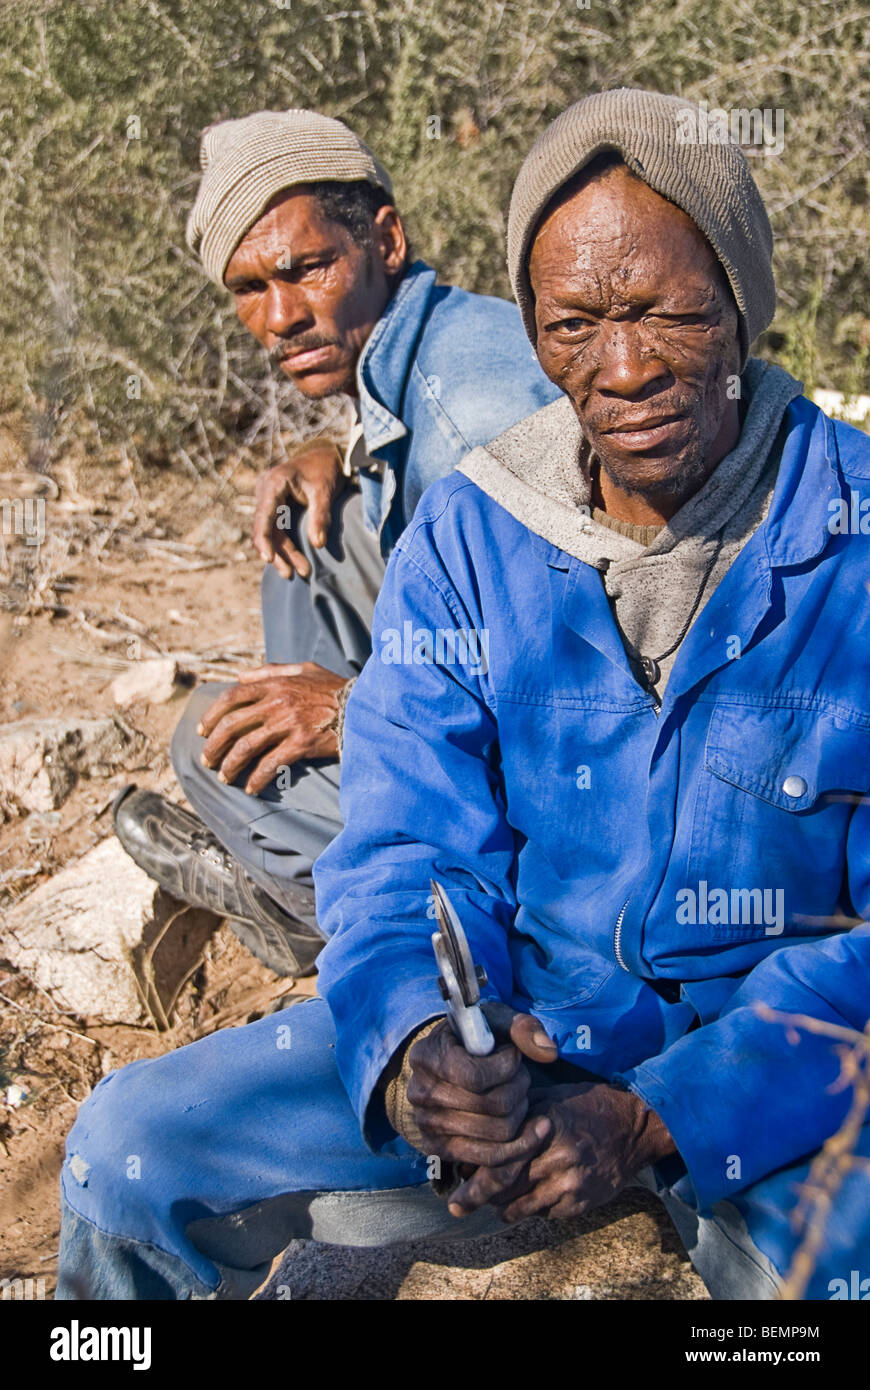 Field workers at rest. South Africa. Stock Photo